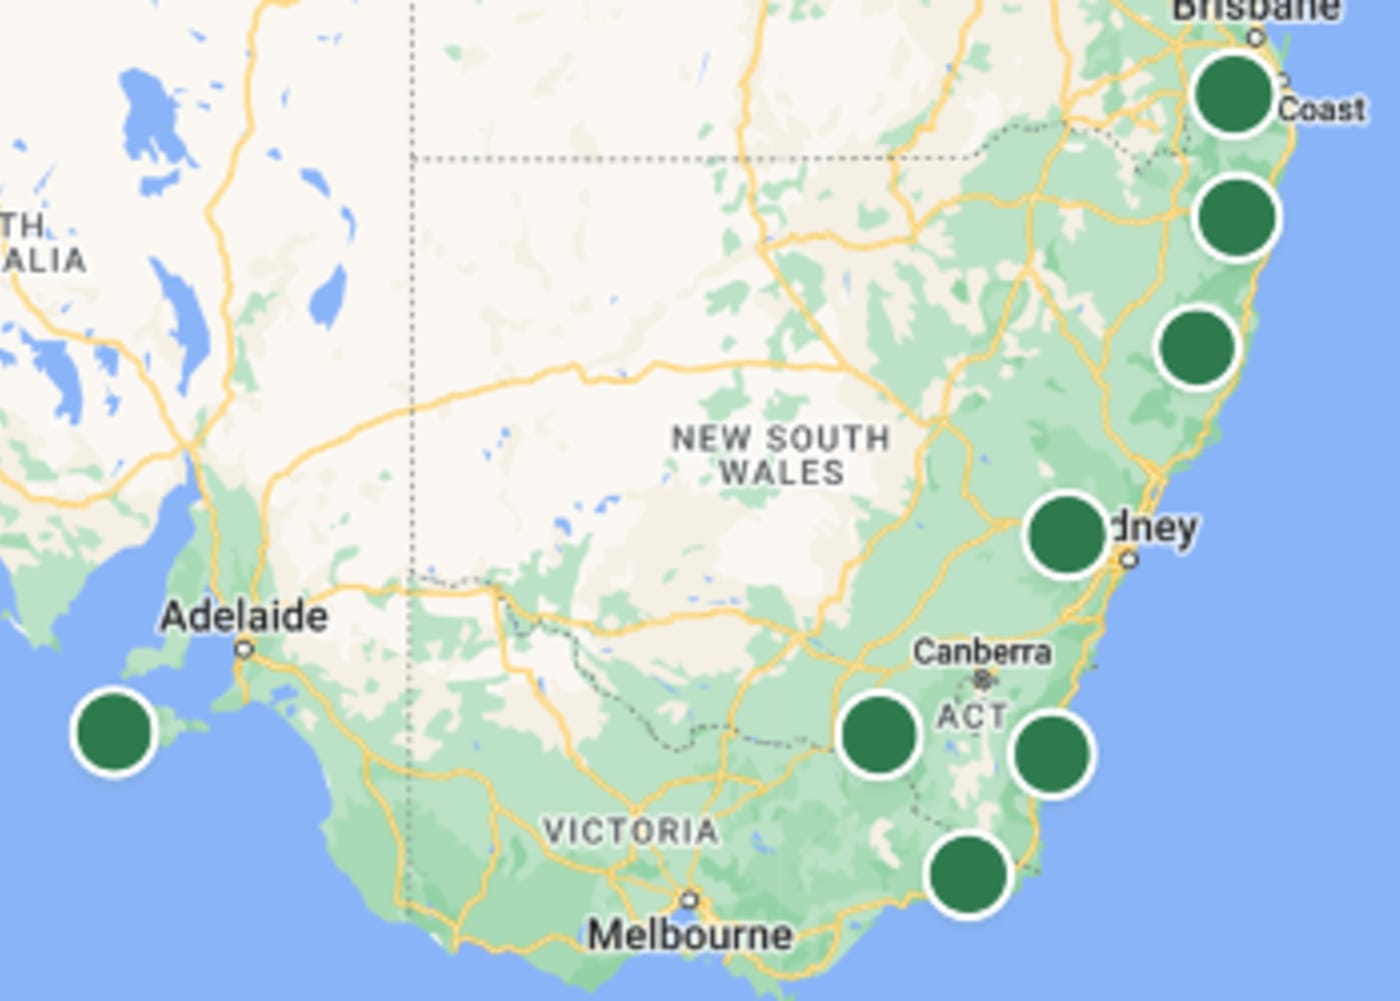 A map shows the 8 regions surveyed by wildlife cameras during Eyes on Recovery. The map shows south eastern Australia, with green dots indicating survey sights along the east coast, near Canberra, and on Kangaroo Island in South Australia.